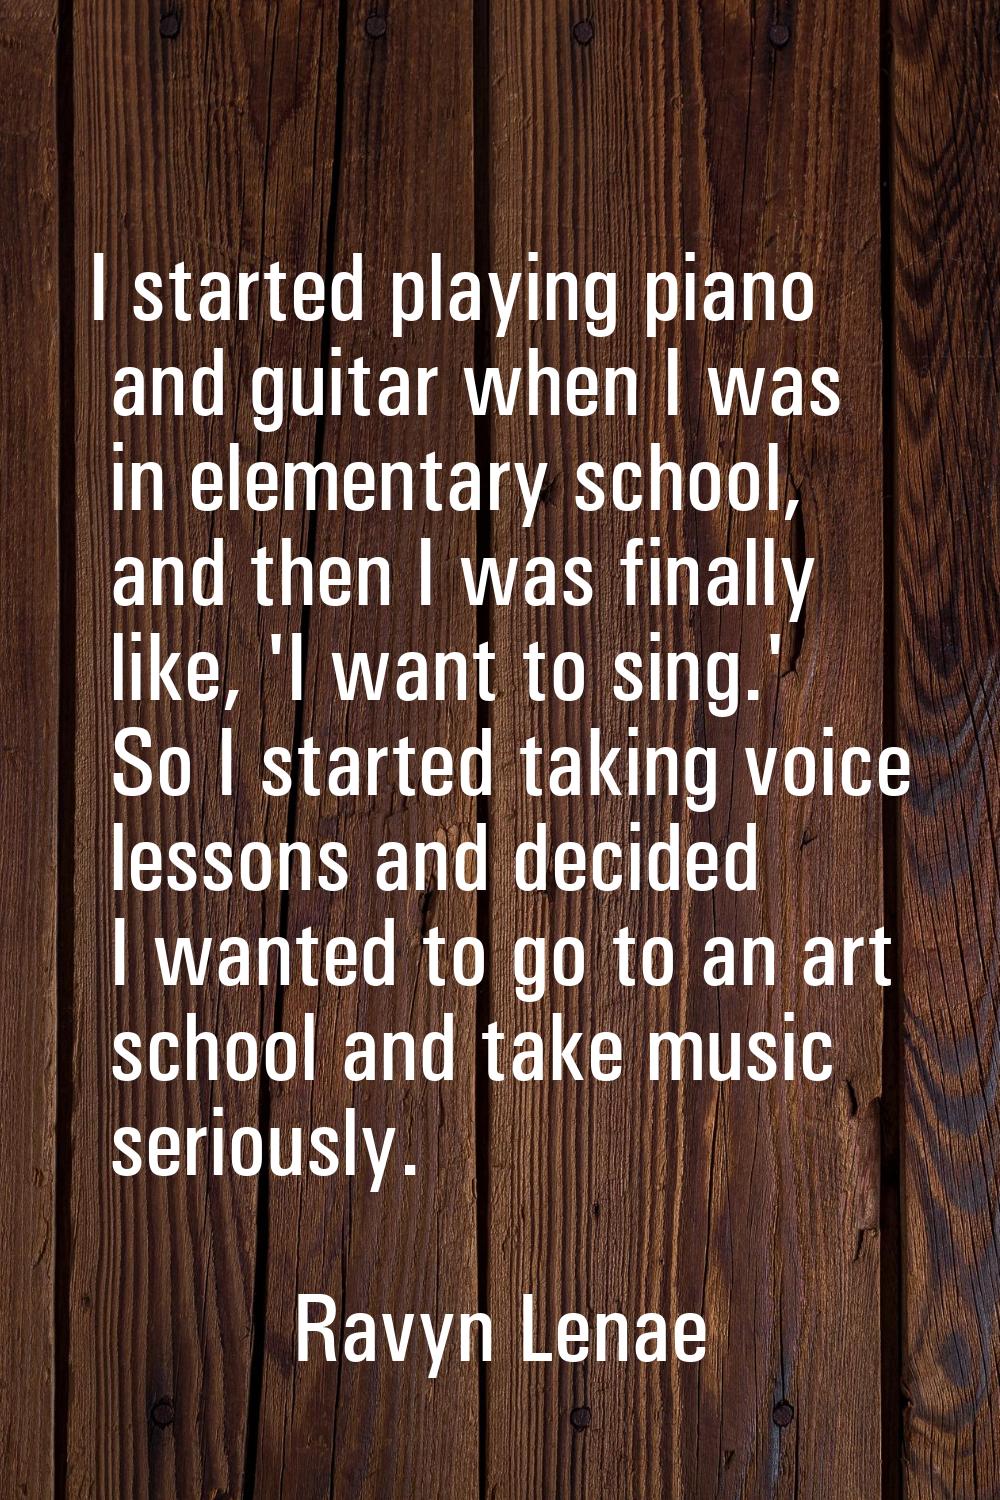 I started playing piano and guitar when I was in elementary school, and then I was finally like, 'I